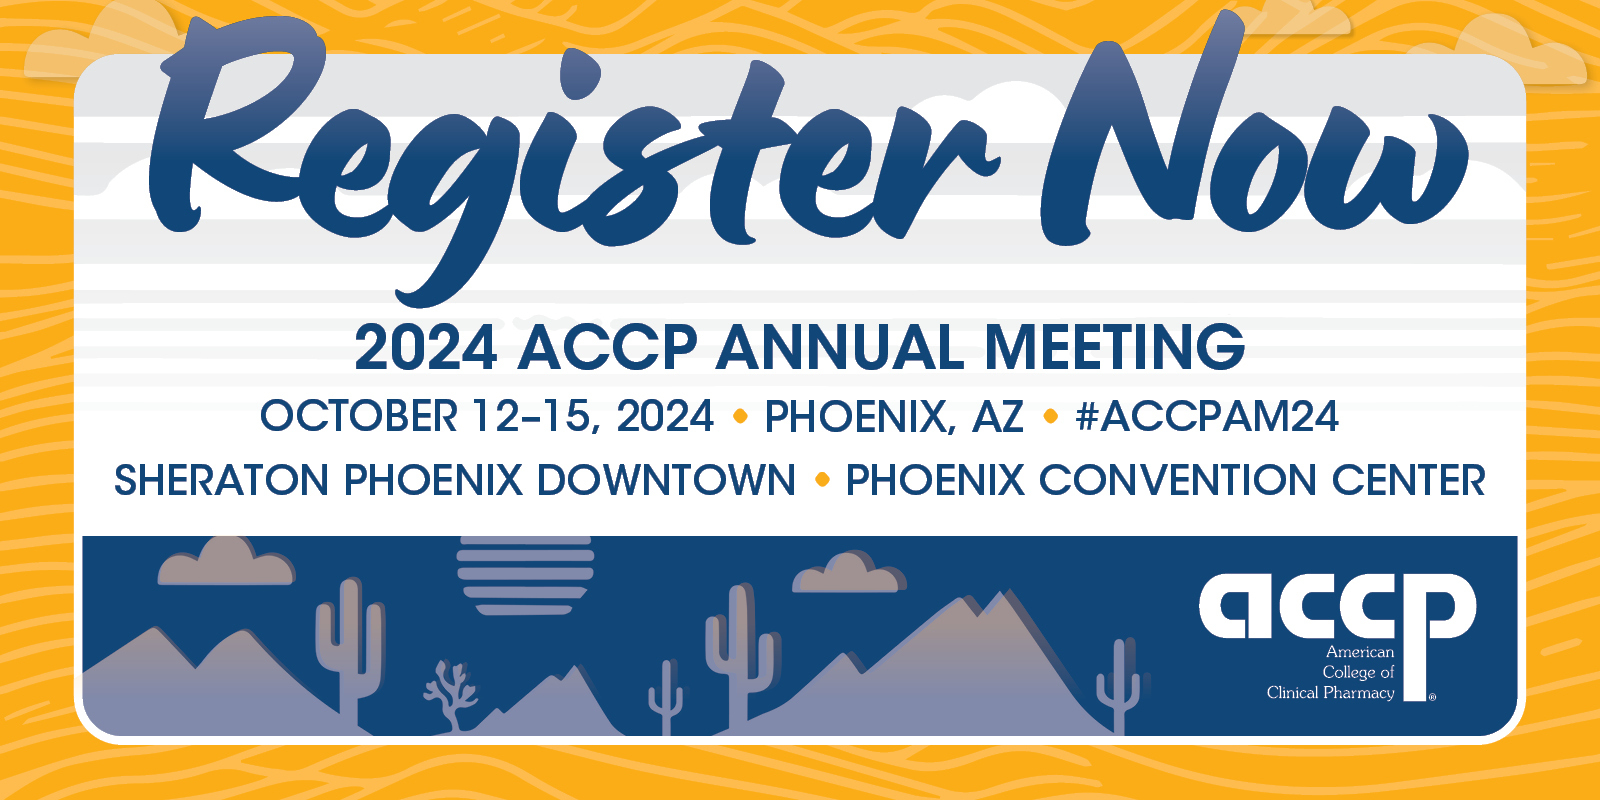 Registration Is Now Open for the 2024 ACCP Annual Meeting